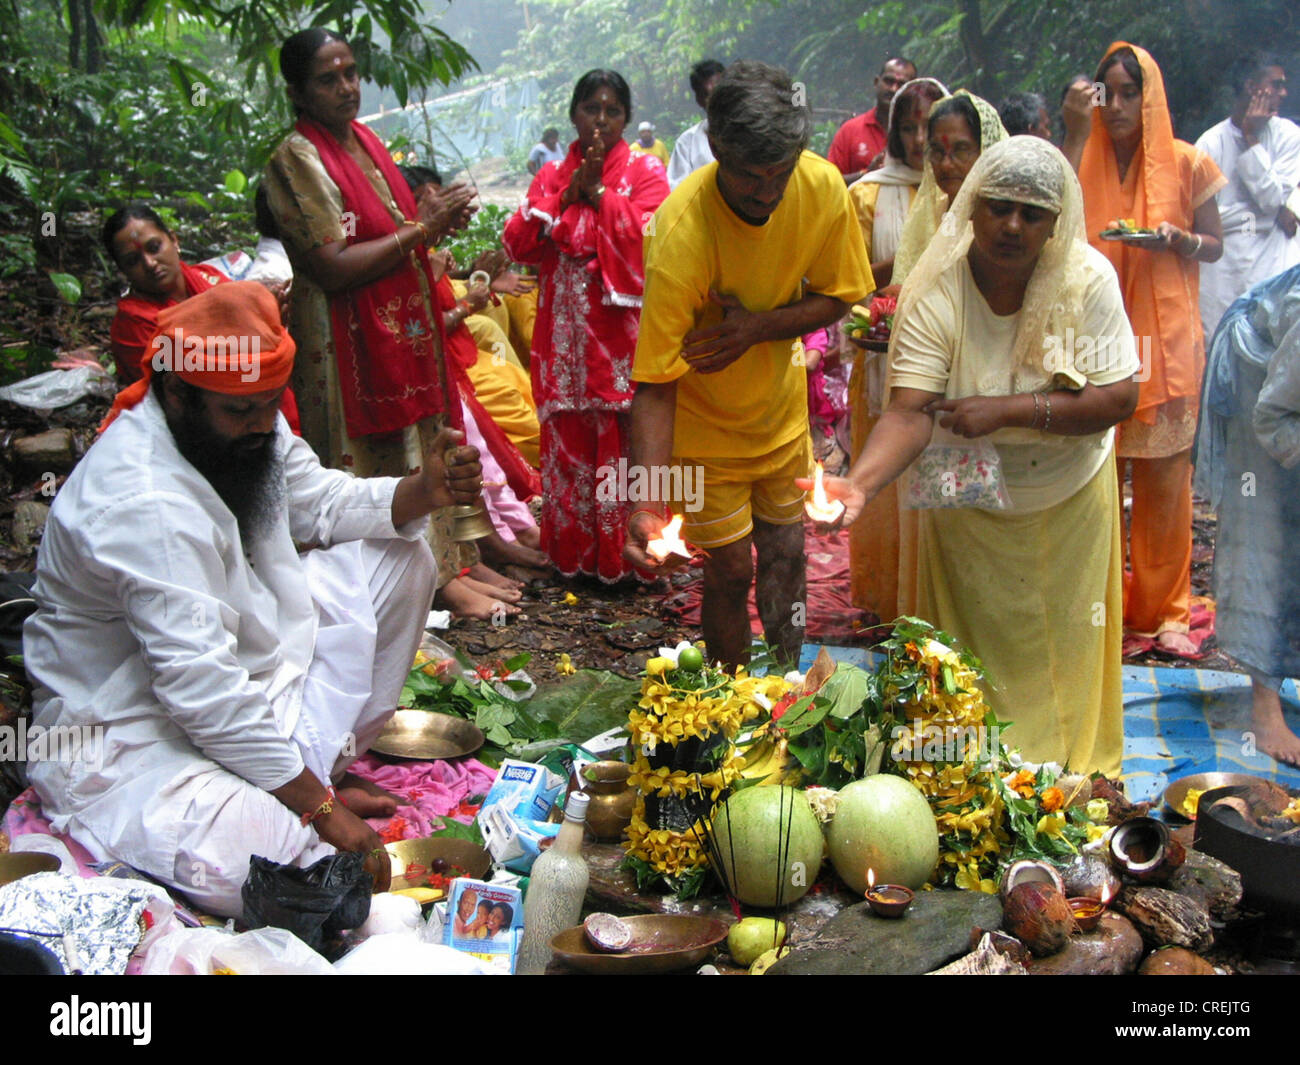 Hindu priests and believers in a river ritual in the north of the carribean island Trinidad, Trinidad and Tobago, Trinidad Stock Photo